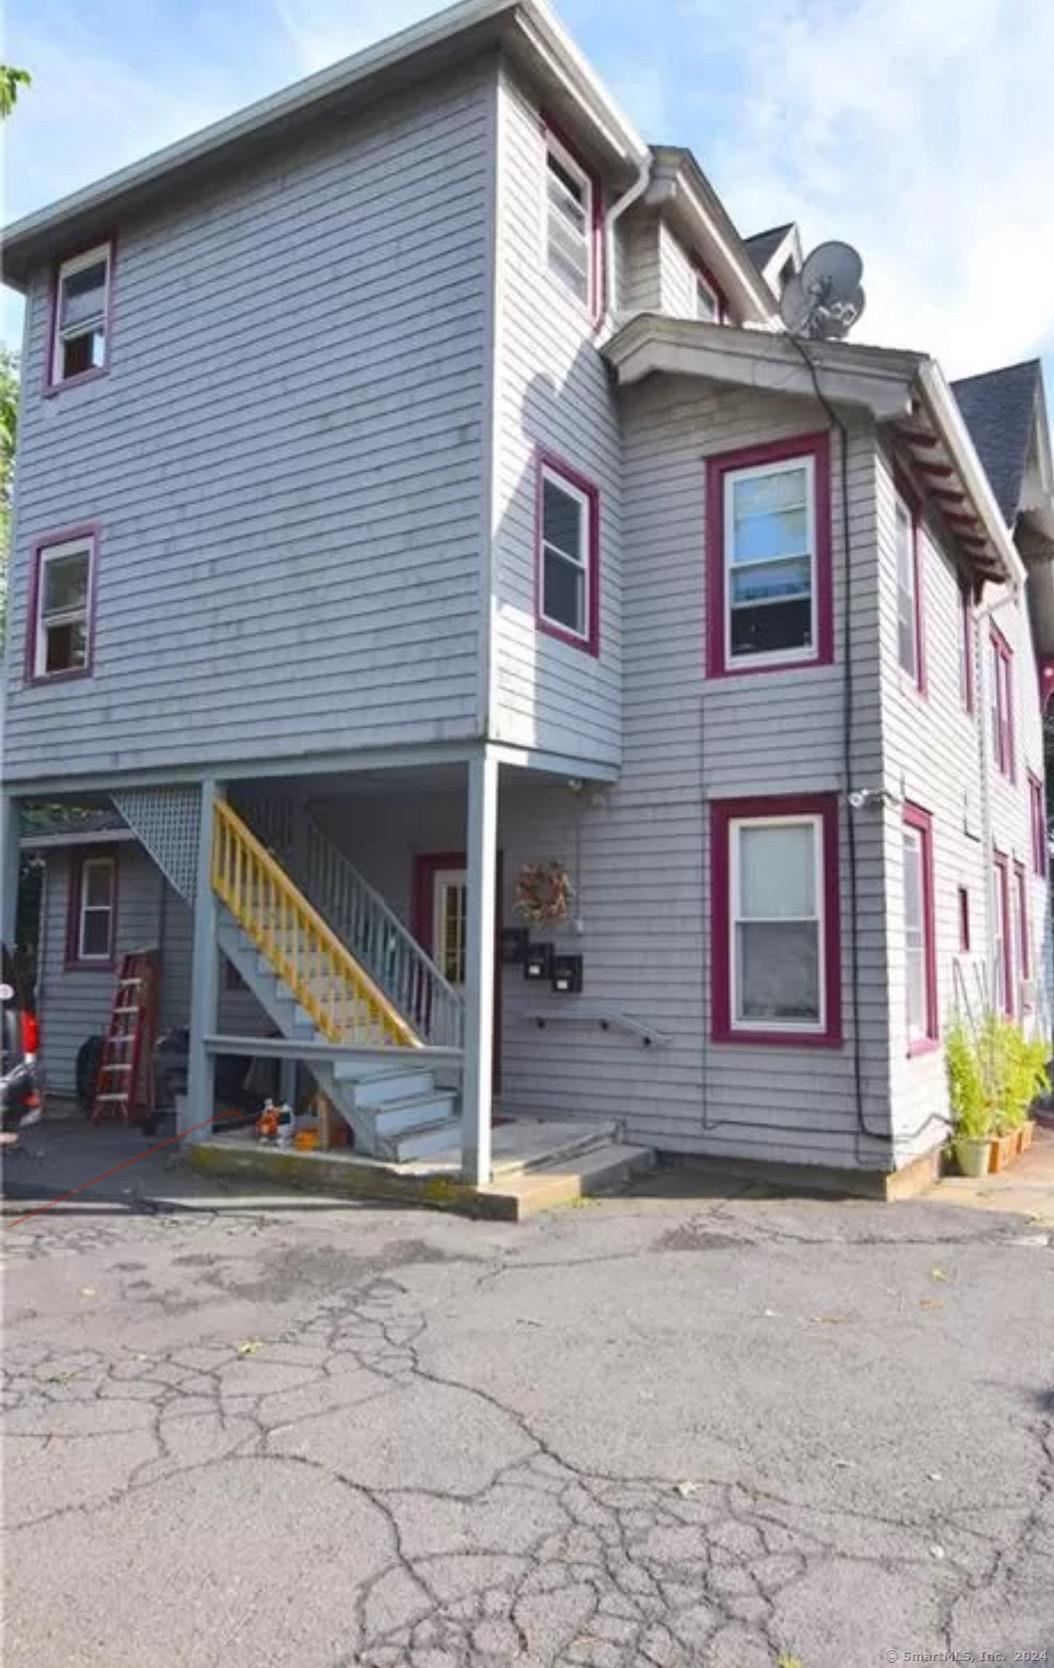 Rental Property at 11 Southview Street, Naugatuck, Connecticut - Bedrooms: 2 
Bathrooms: 1 
Rooms: 4  - $1,675 MO.